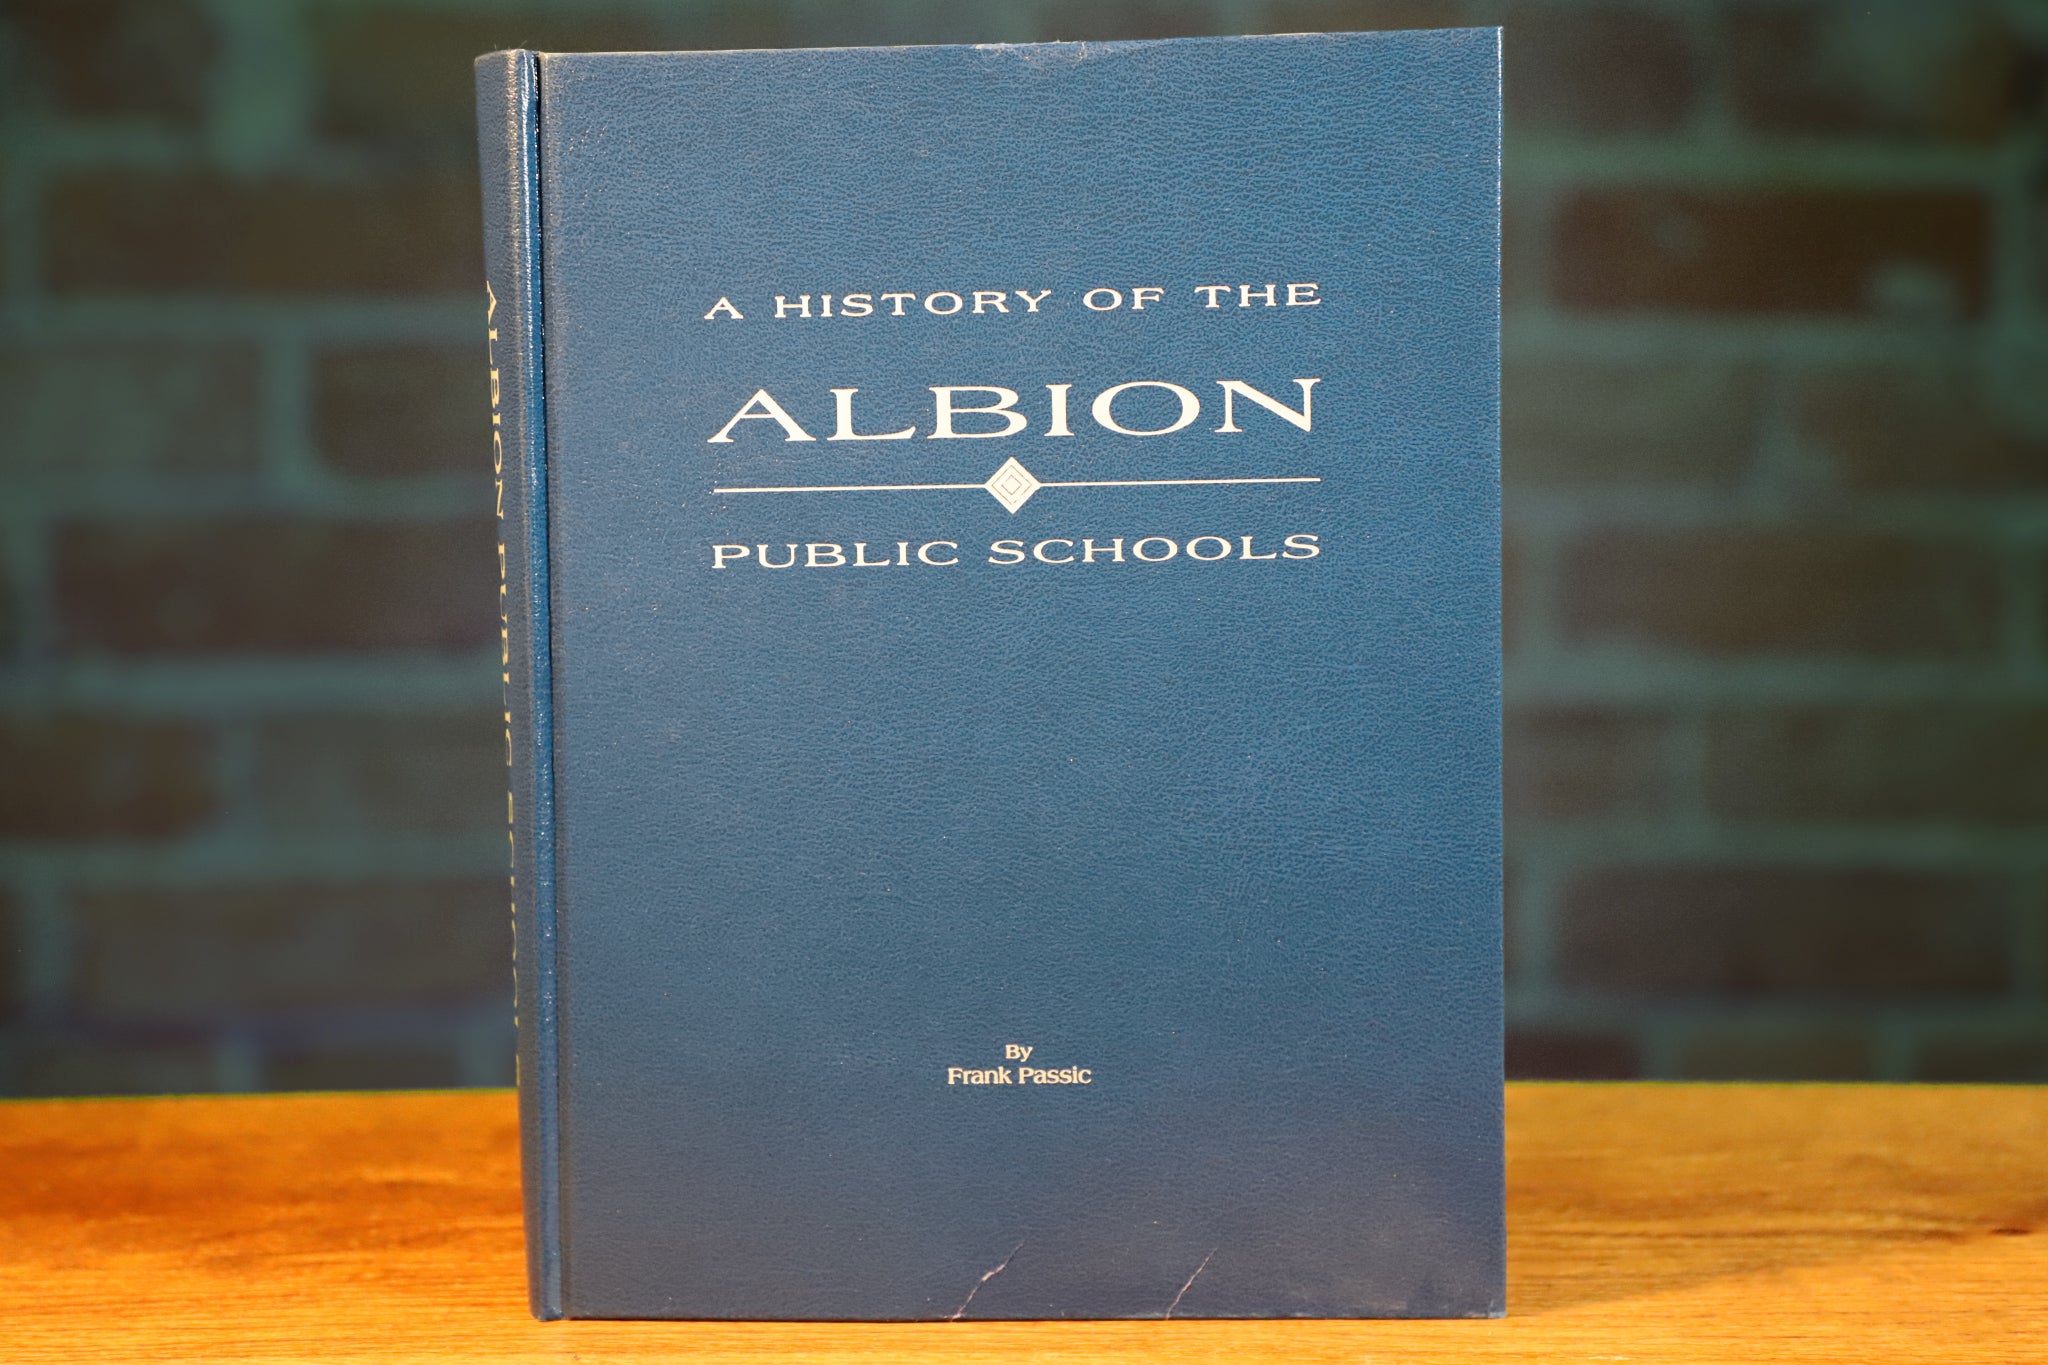 History of Albion Public Schools by Frank Passic